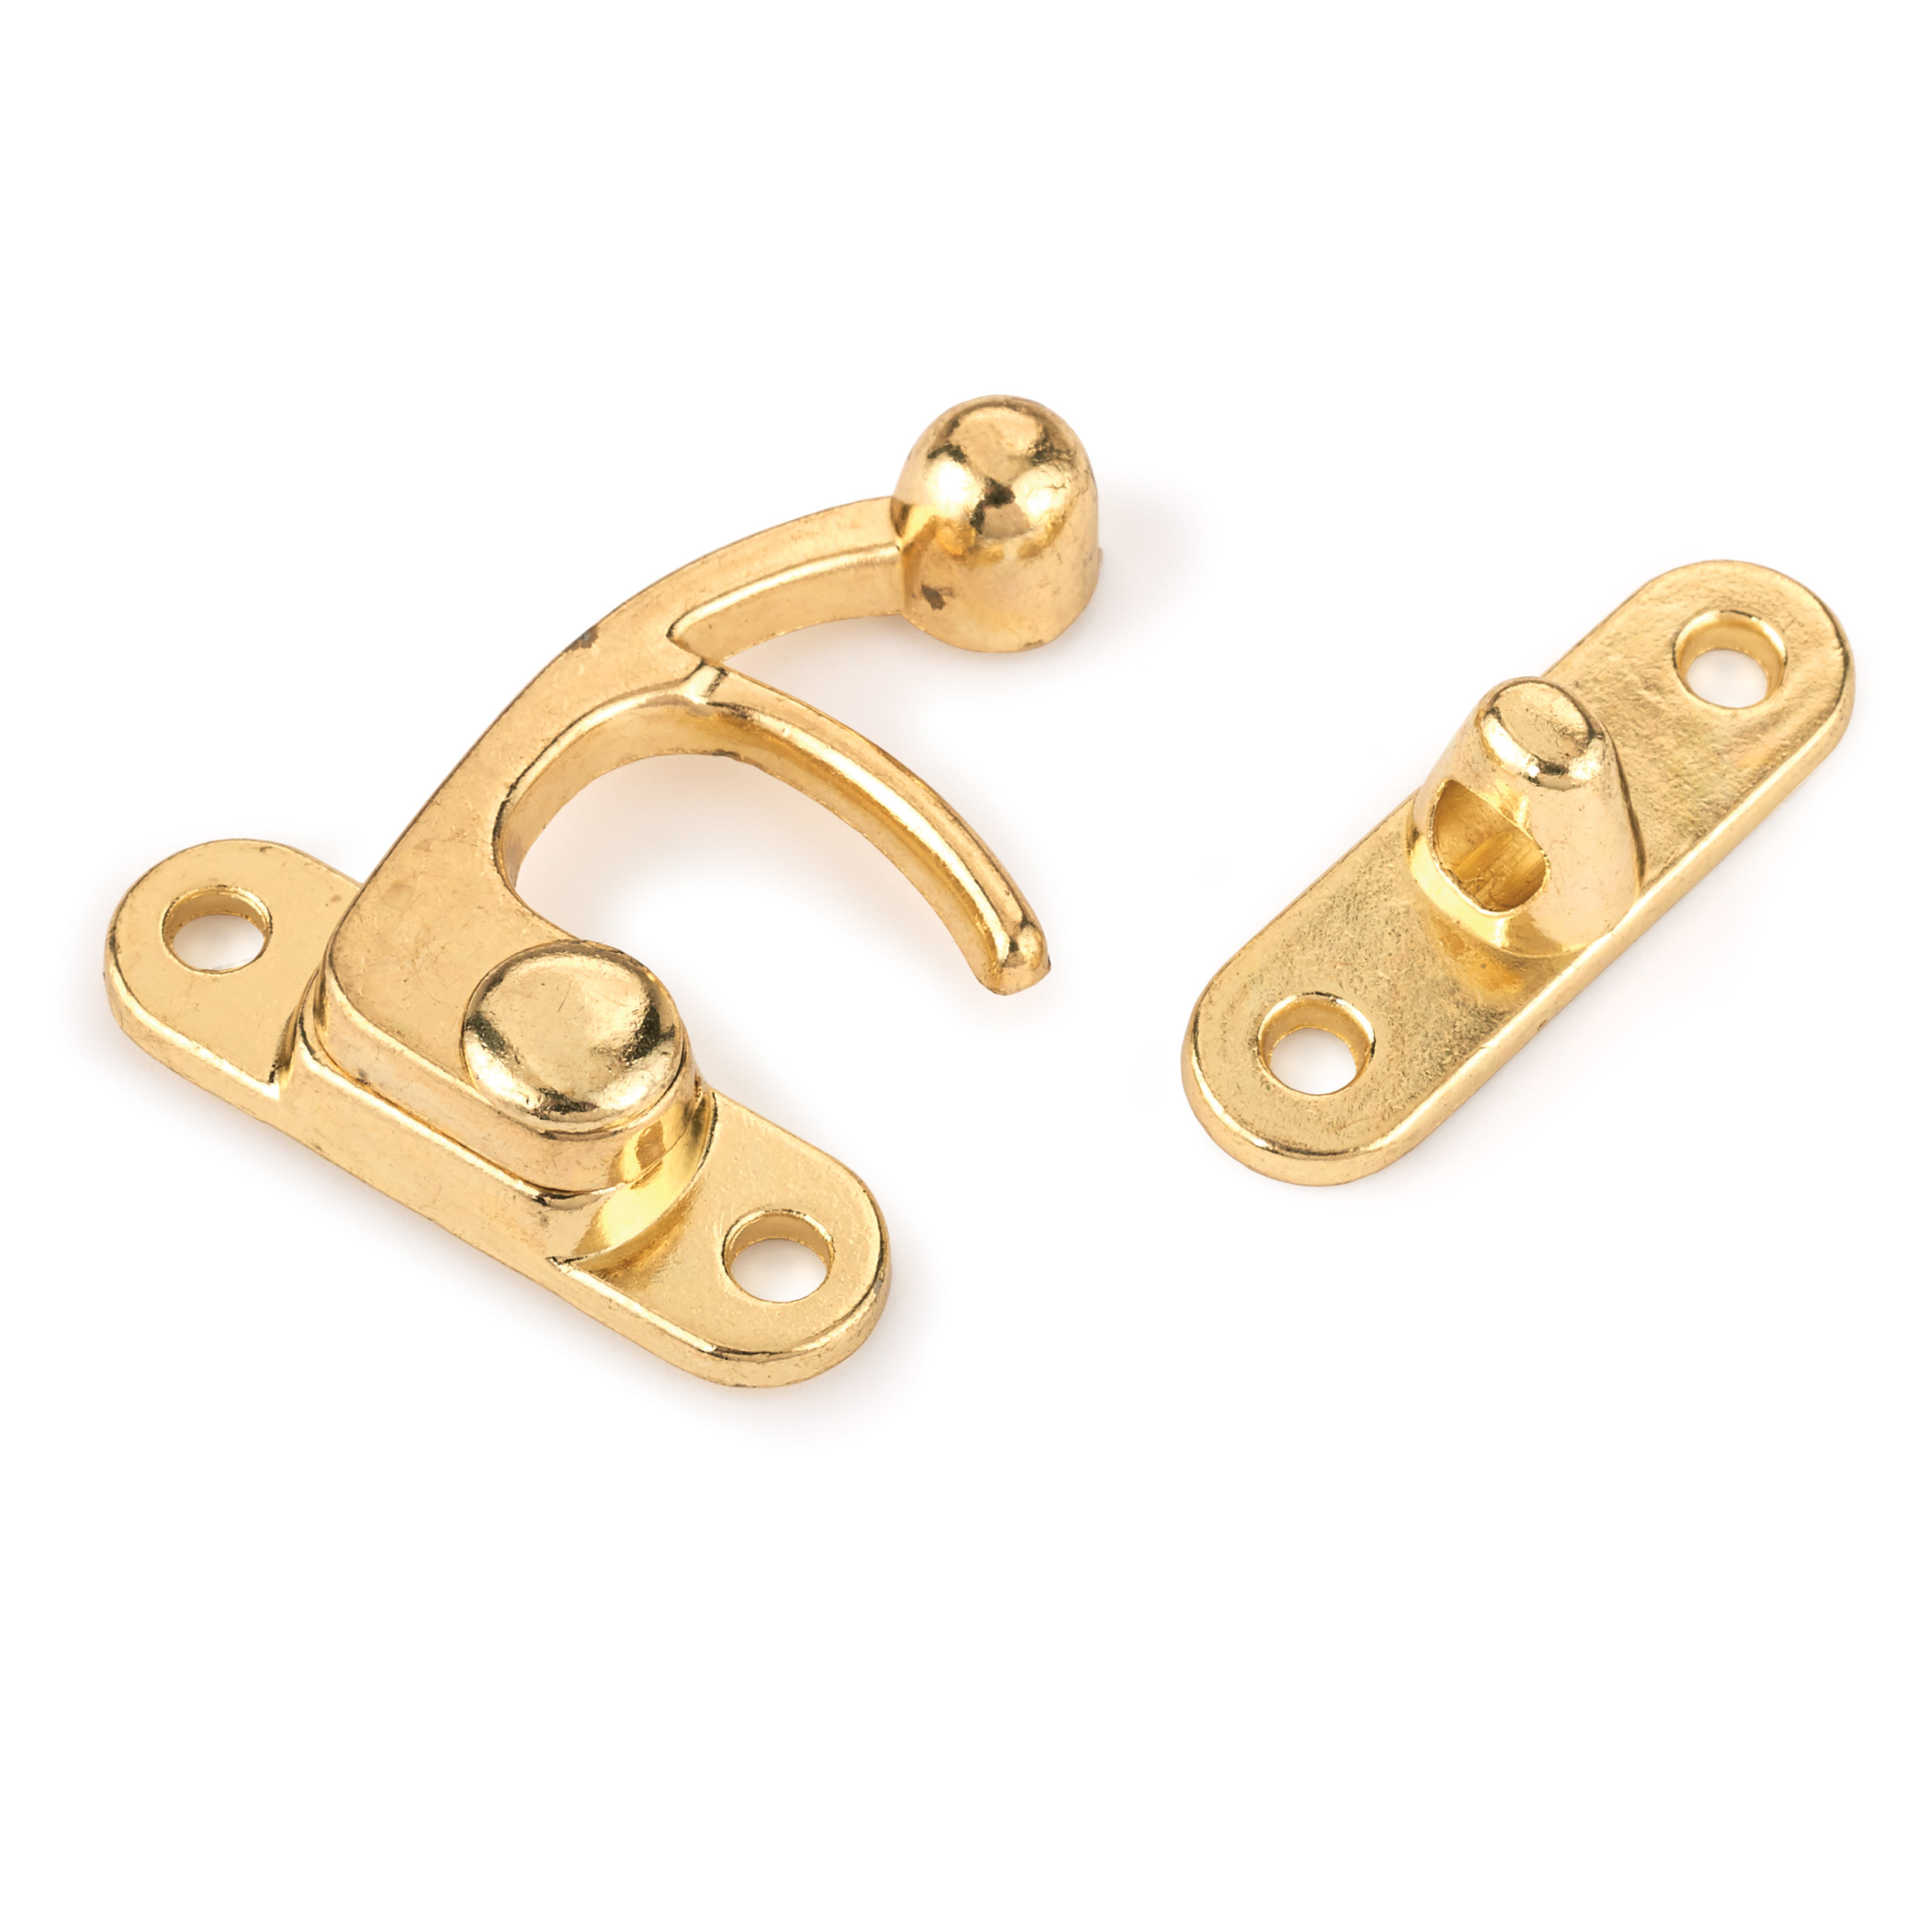 Hook Latch Large Polished Brass Plated 1-piece With Screws